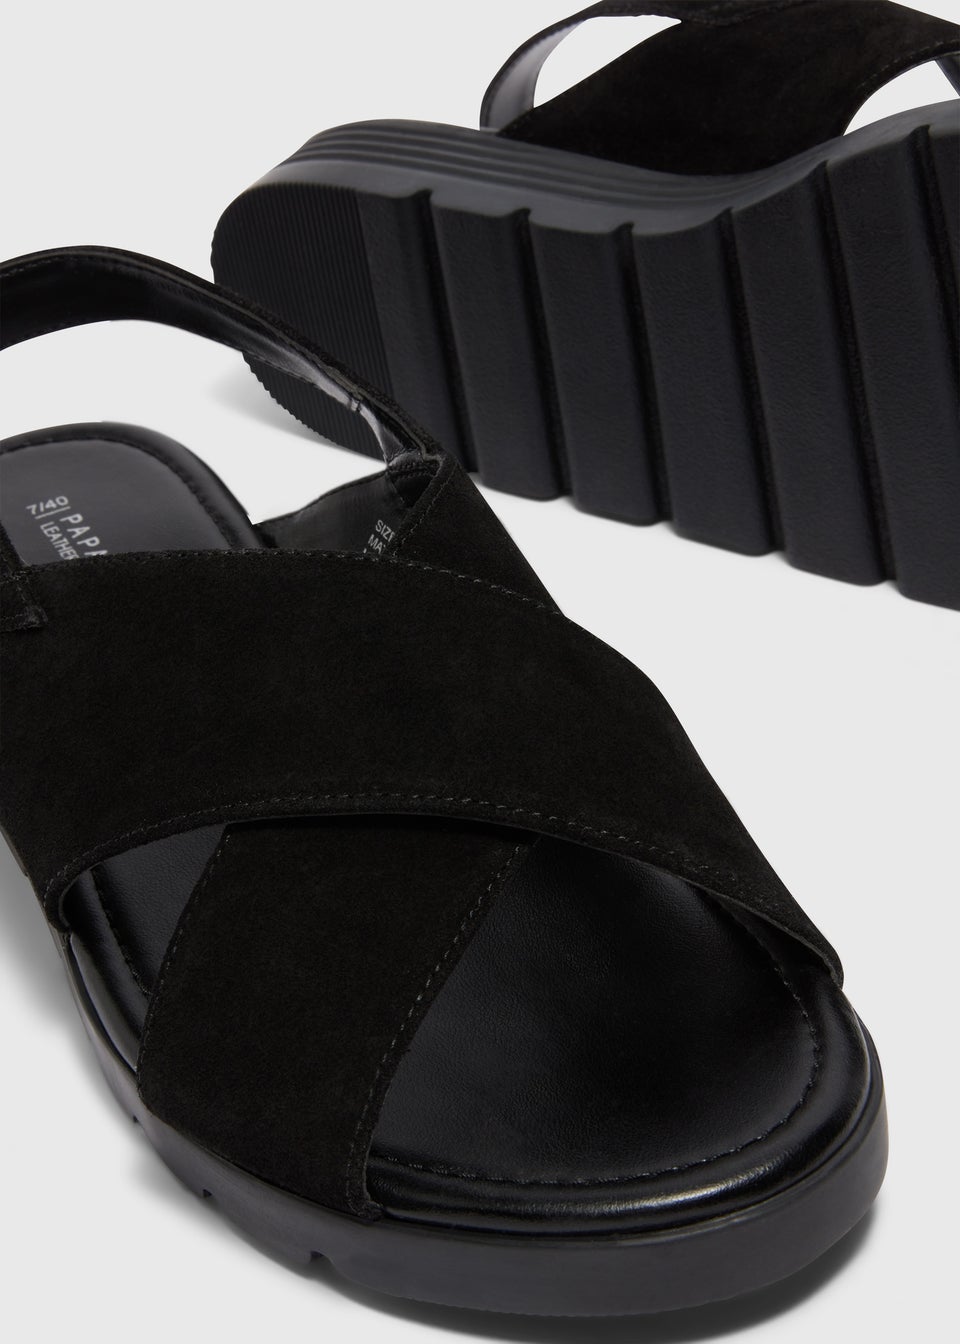 Black Leather Suede Cross Strap Sandals